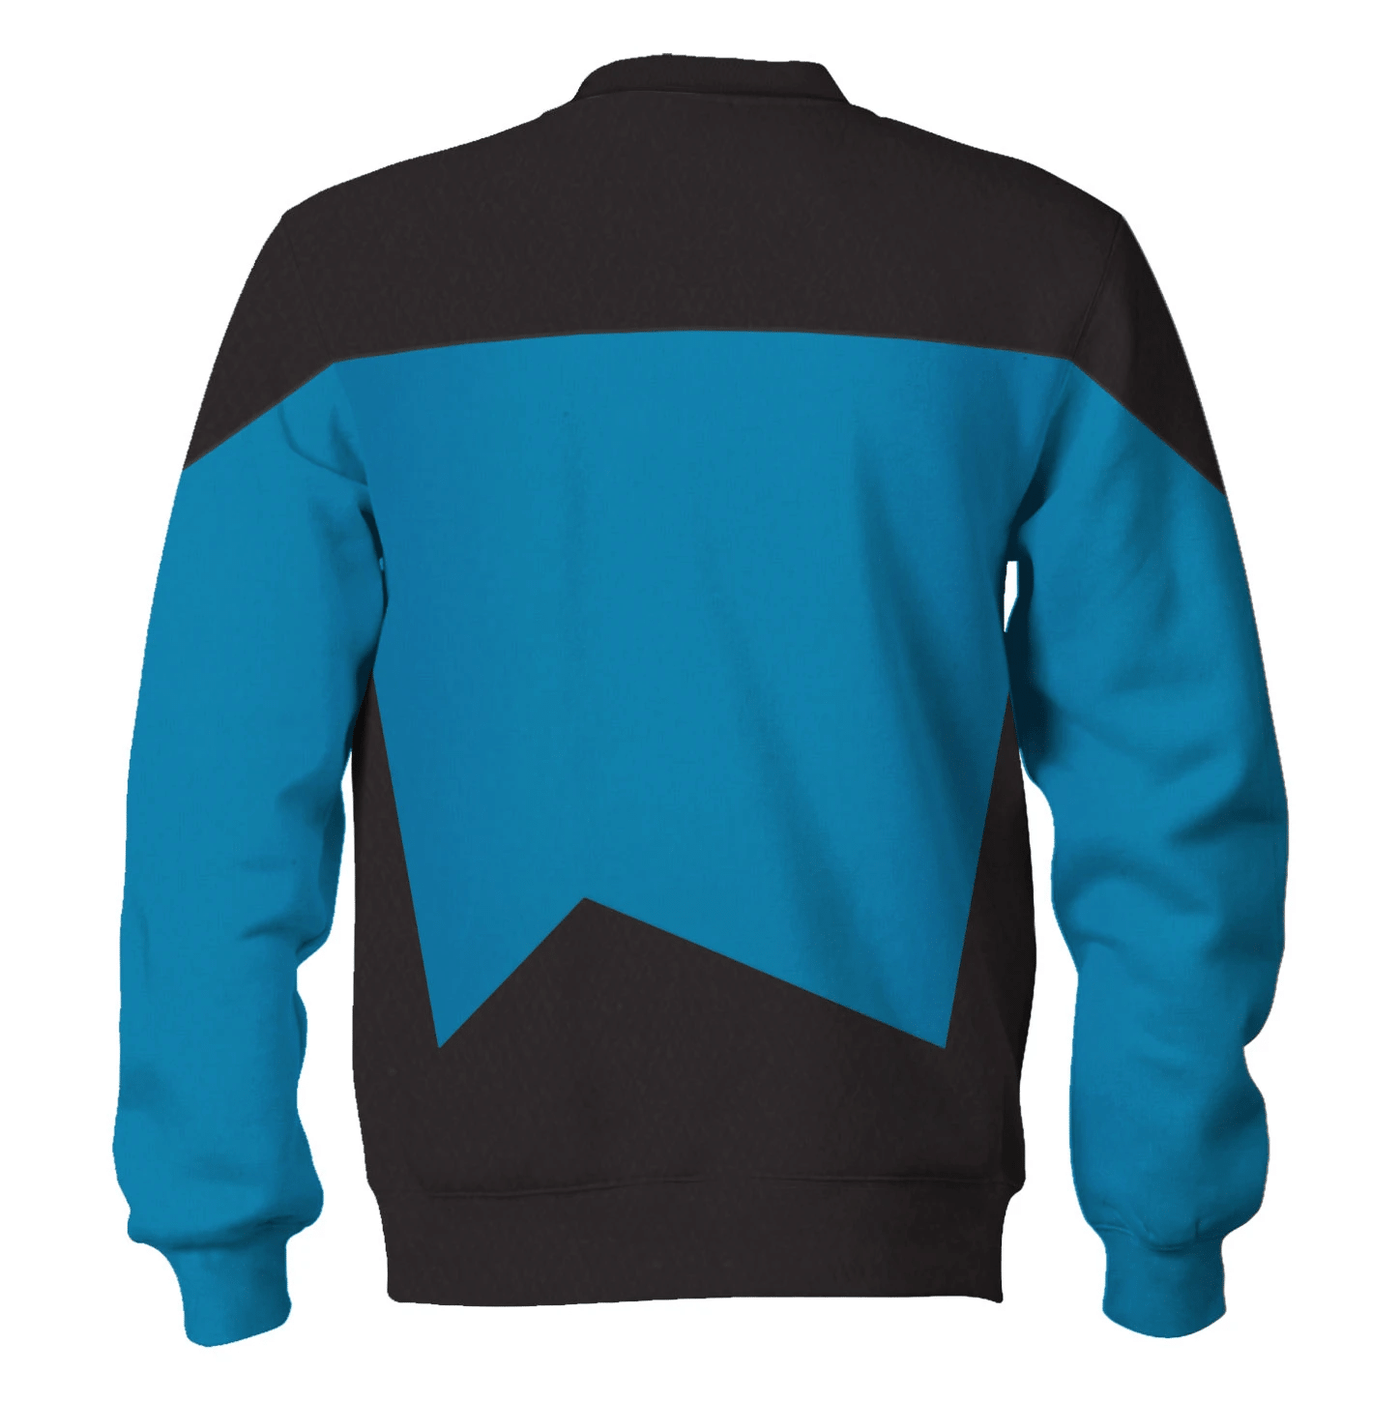 Star Trek The Next Generation Blue Cool - Sweater - Ugly Christmas Sweater